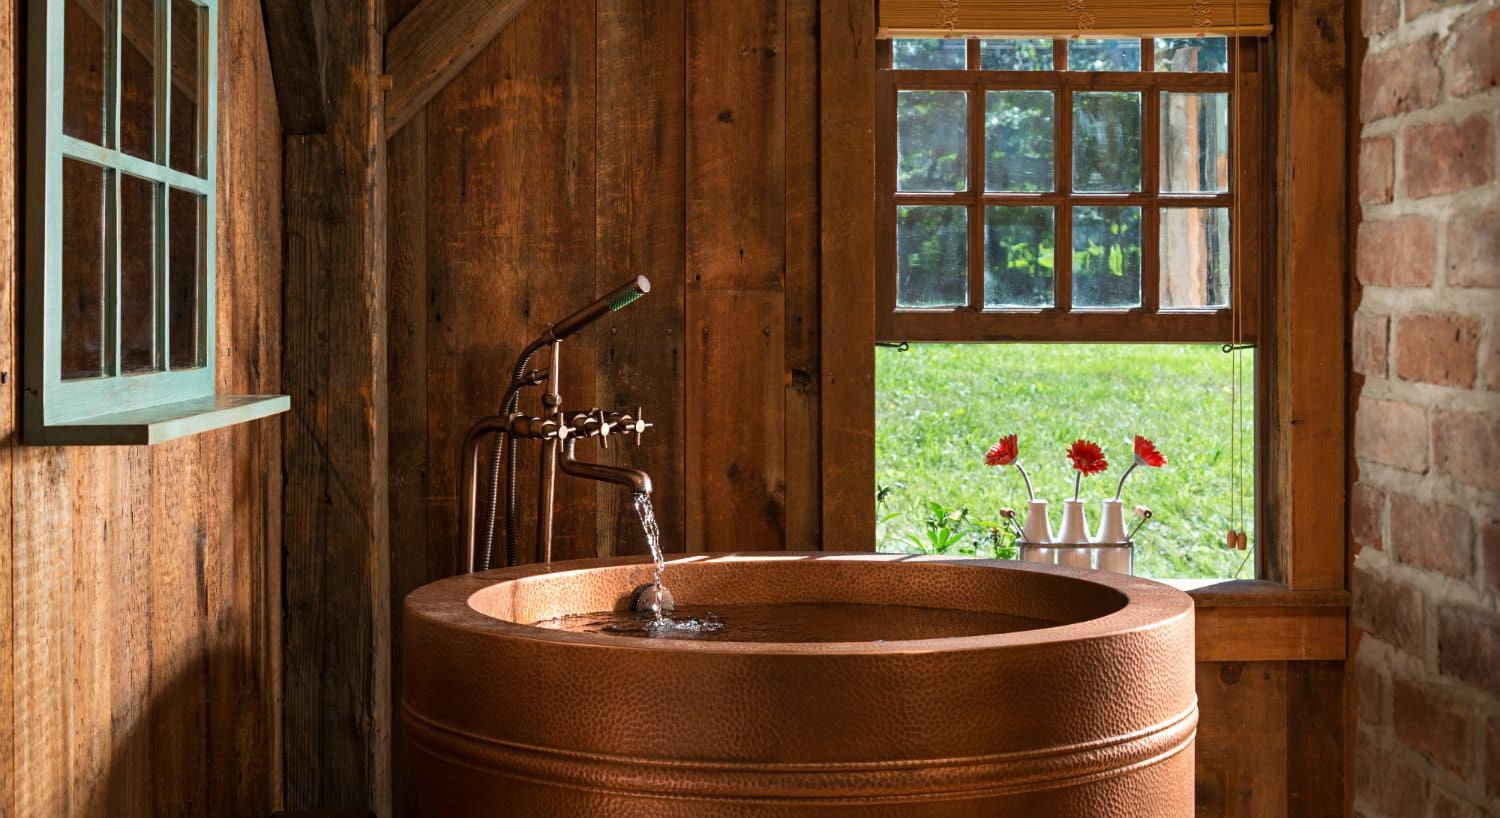 Wood and brick room with round copper tub, antique faucet and open window with three white vases of red flowers